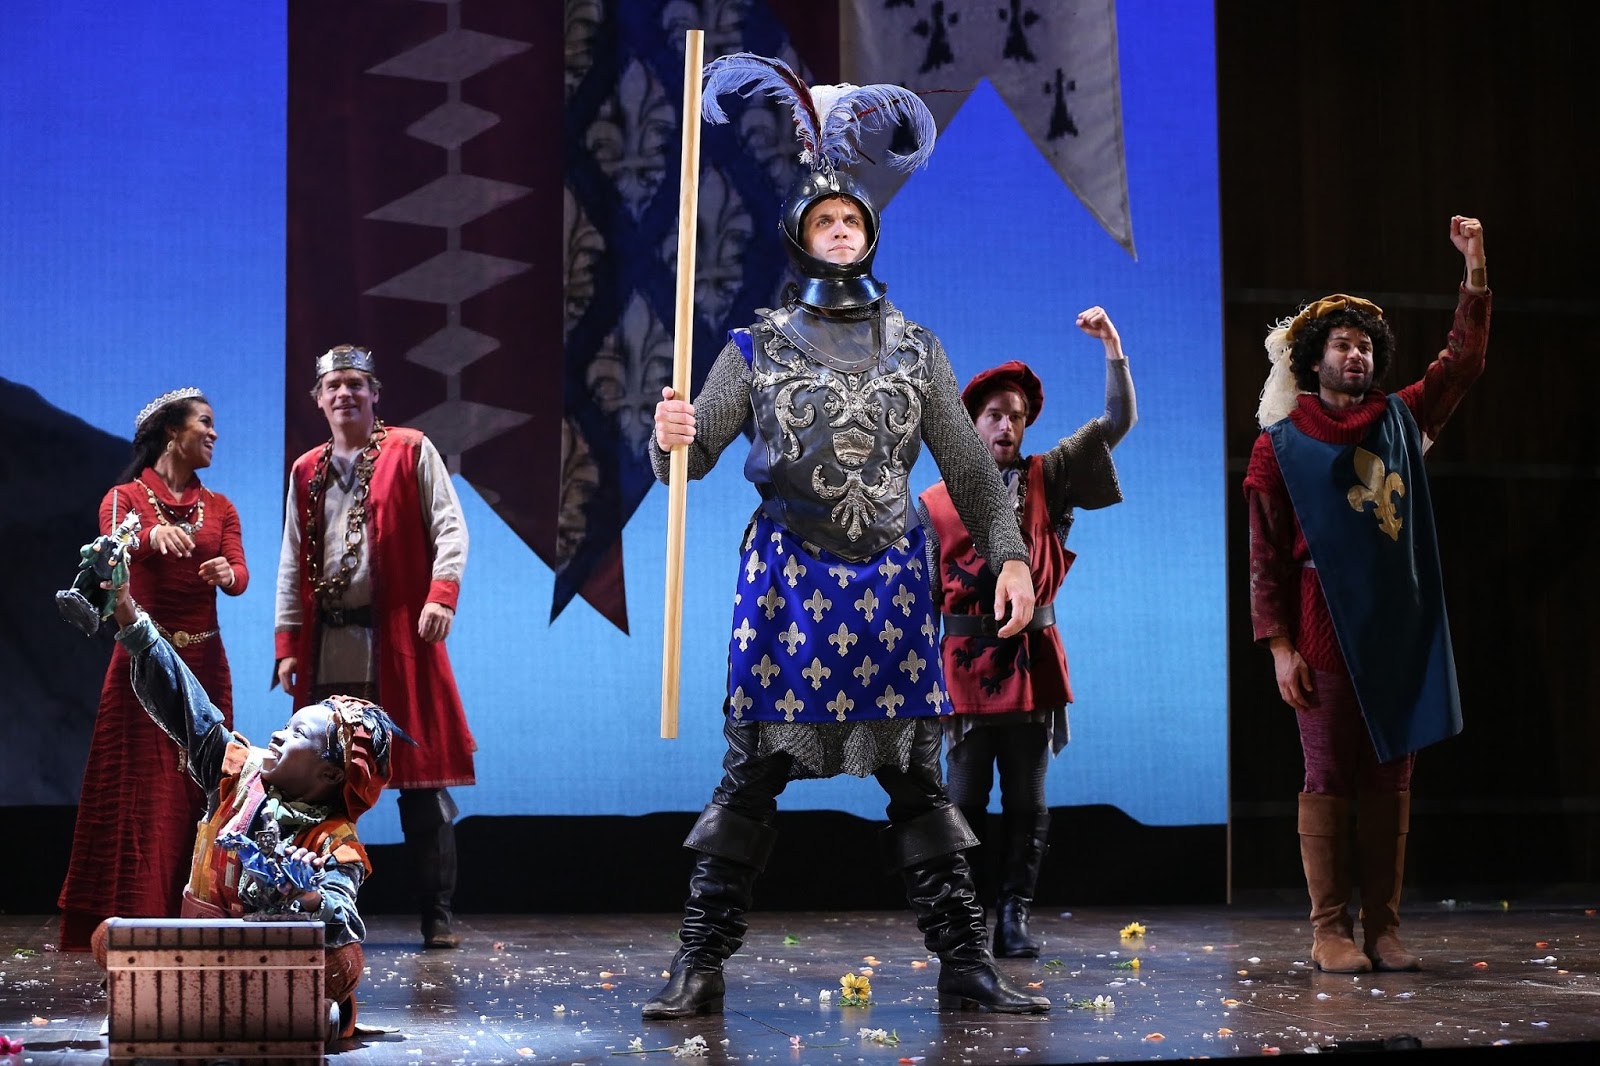 Stu on Broadway Review of "Camelot"